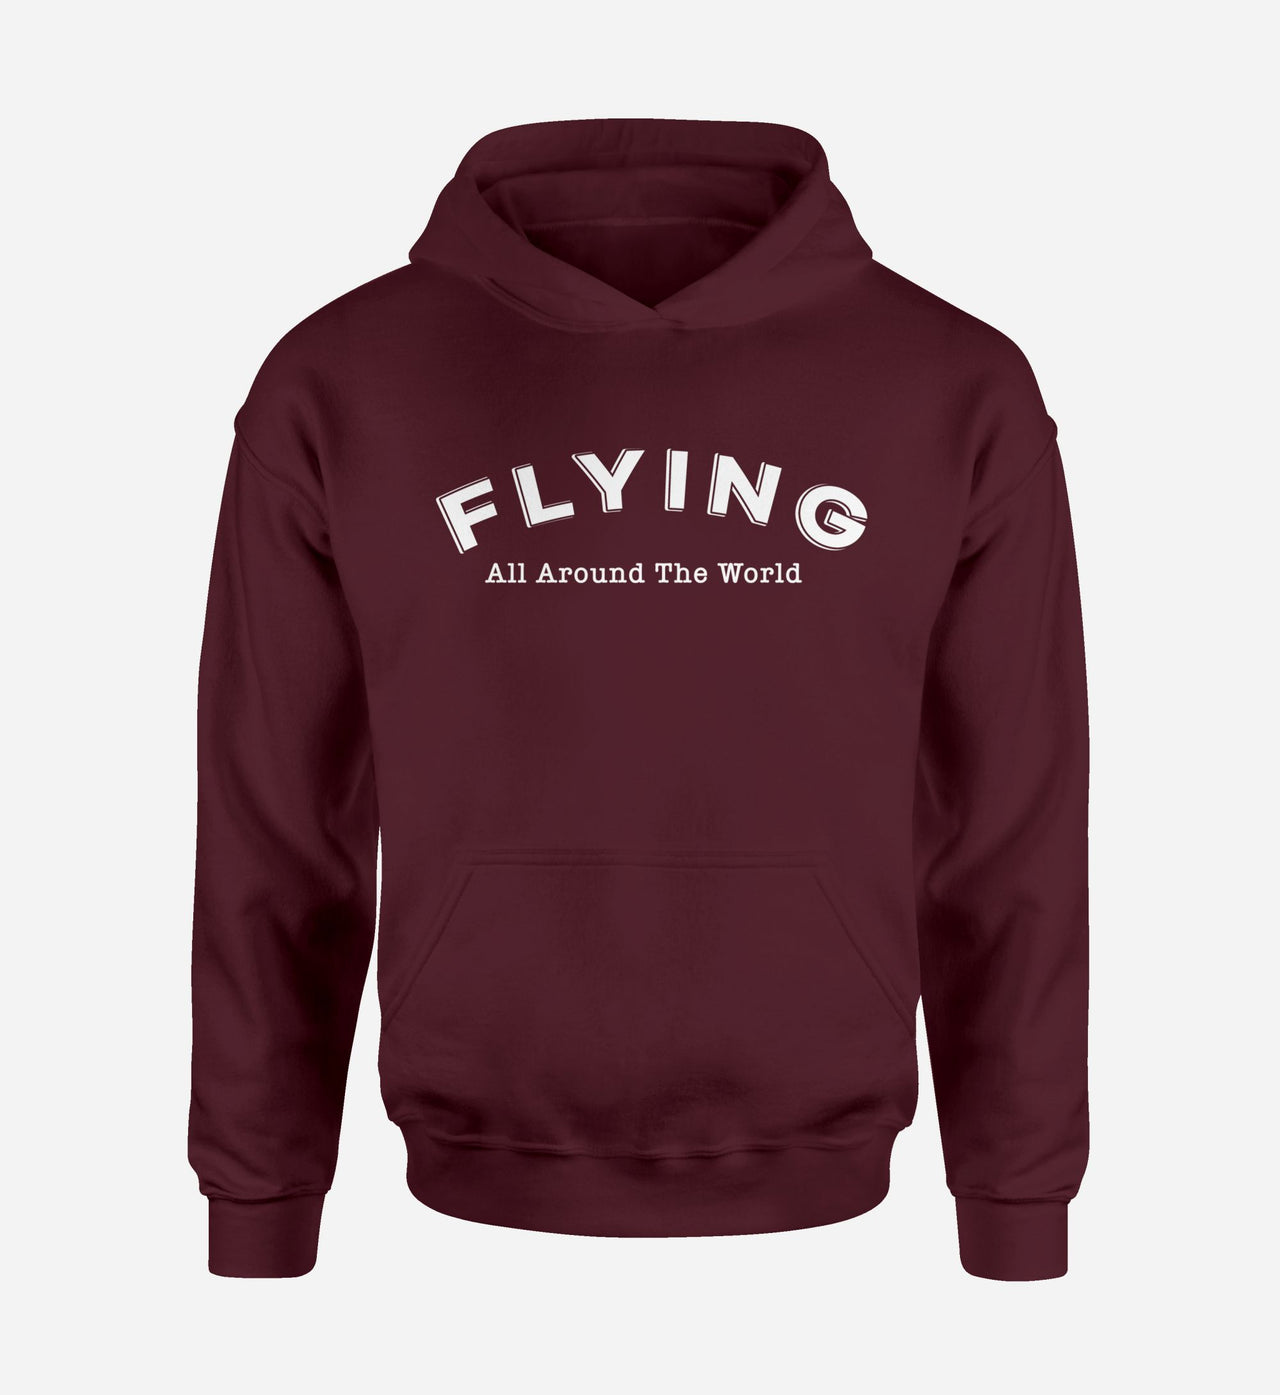 Flying All Around The World Designed Hoodies